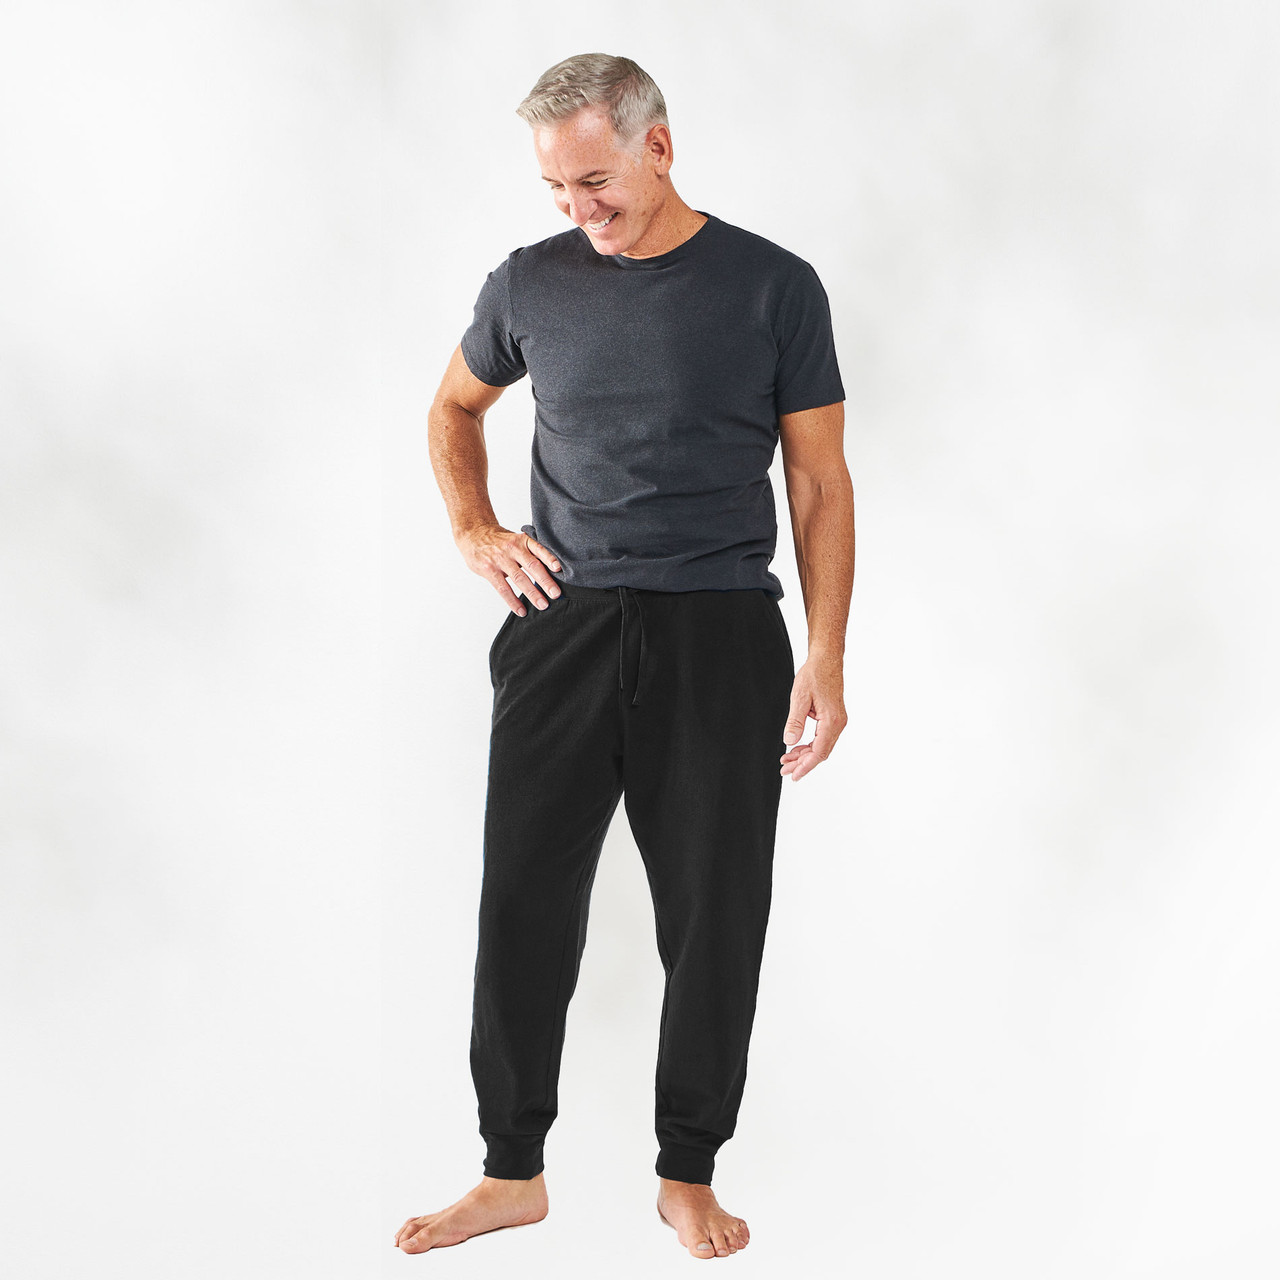 What Shirts Do You Wear with Joggers?, by Blakonik